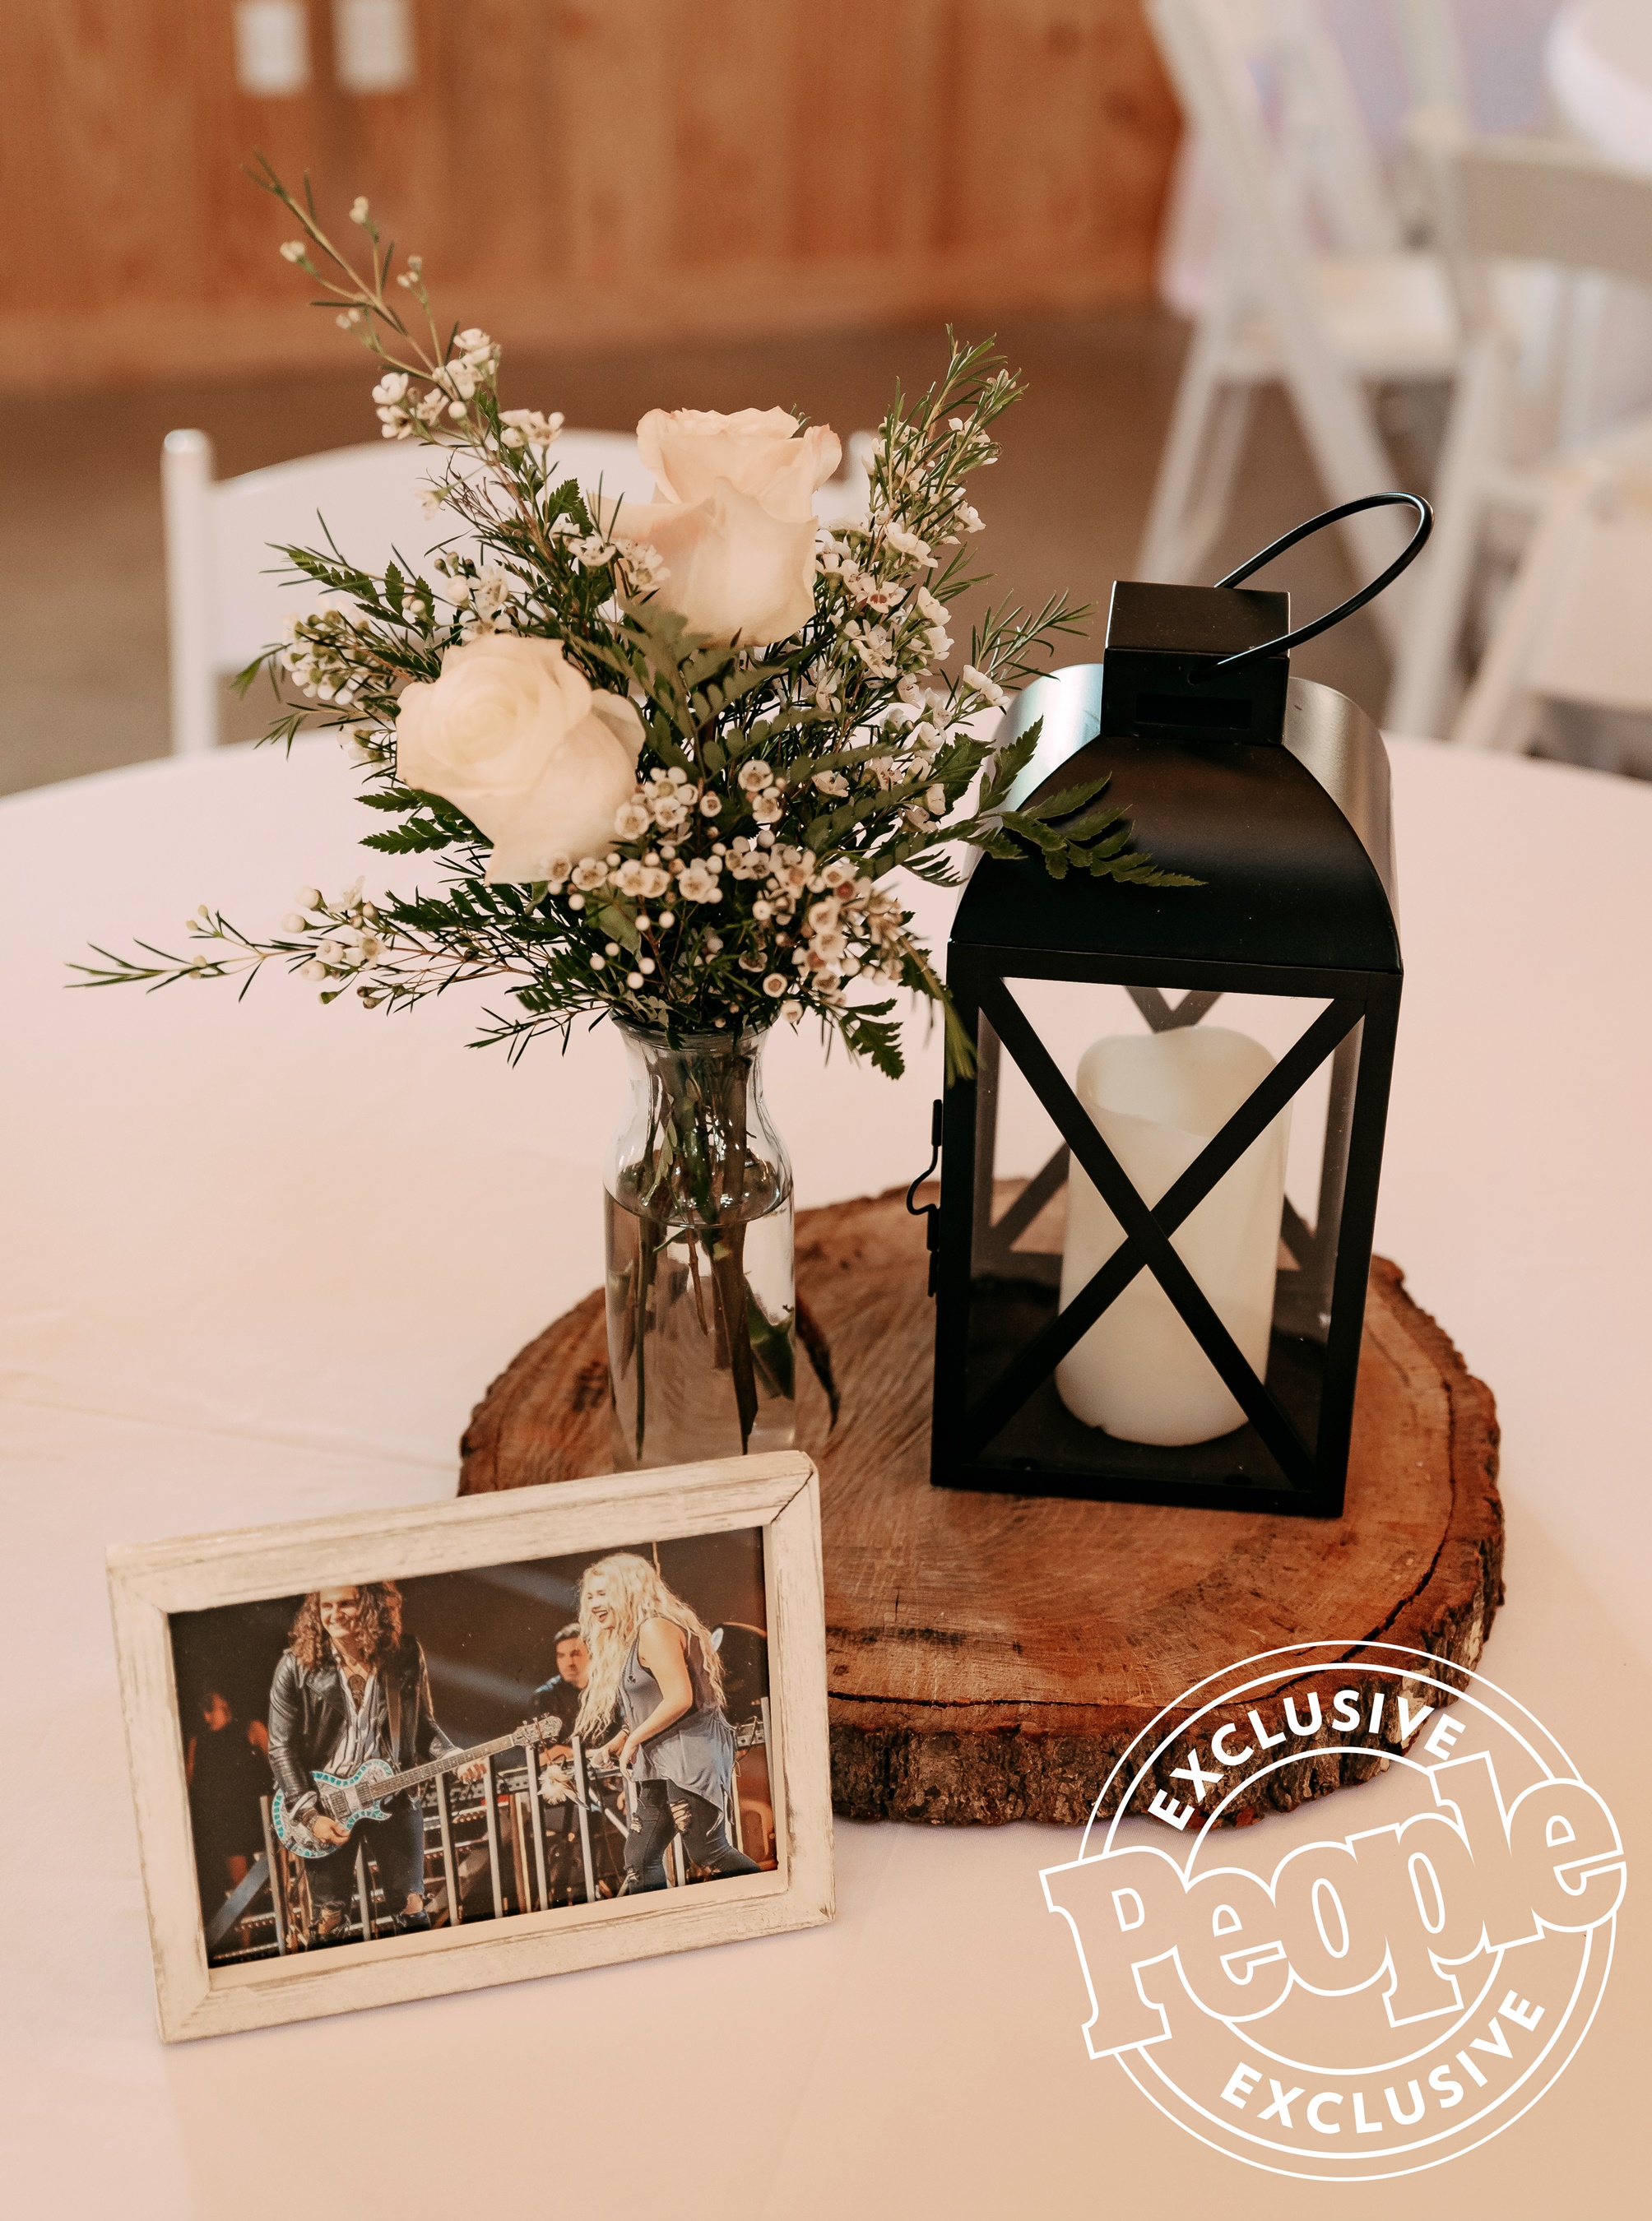 Cade Foehner and Gabby Barrett's wedding at Union Springs Wedding and Event Venue - Garrison, TX - October 5, 2019
Photo credit: People.com | Lilly Welch
